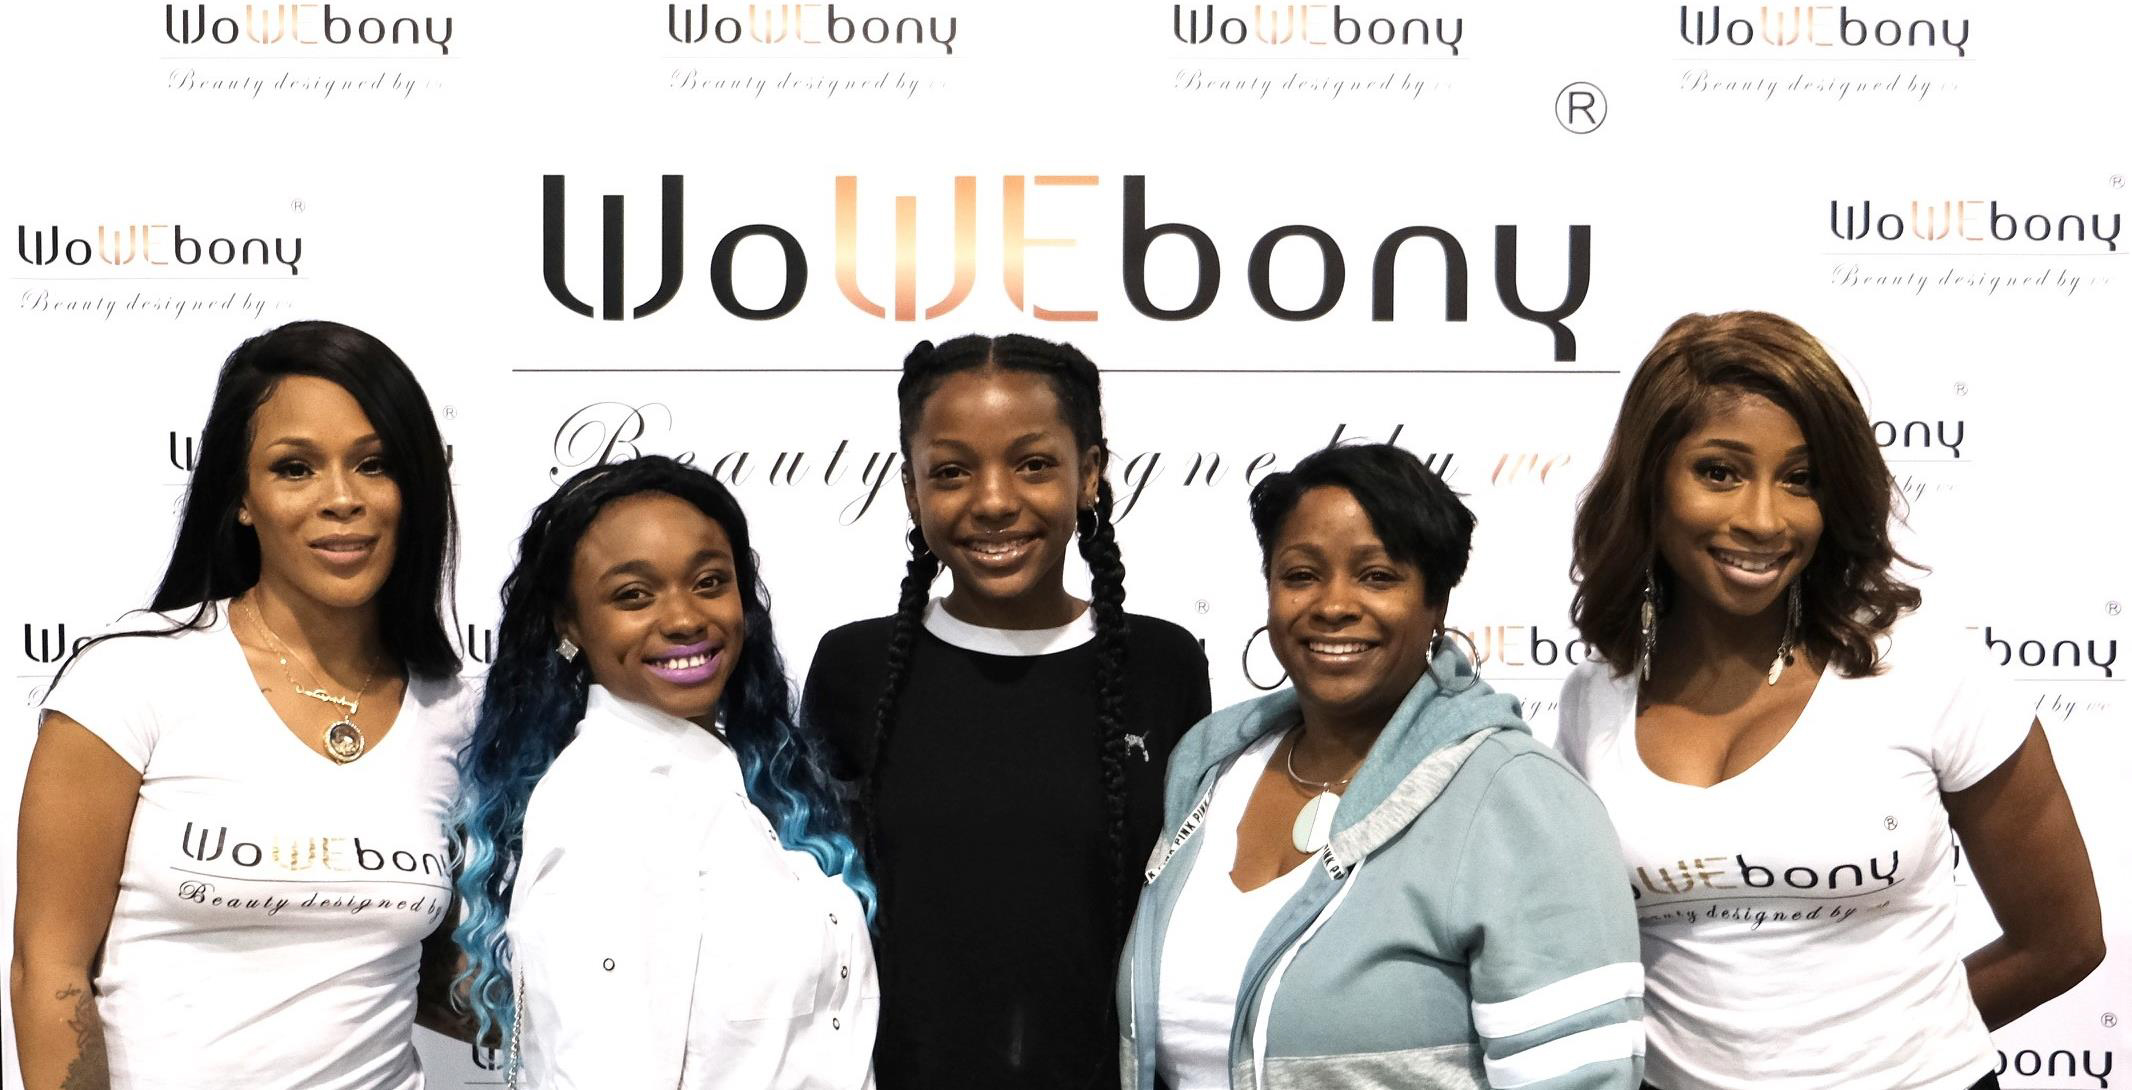 The Chicago Ultimate Women's Expo WoWEbony